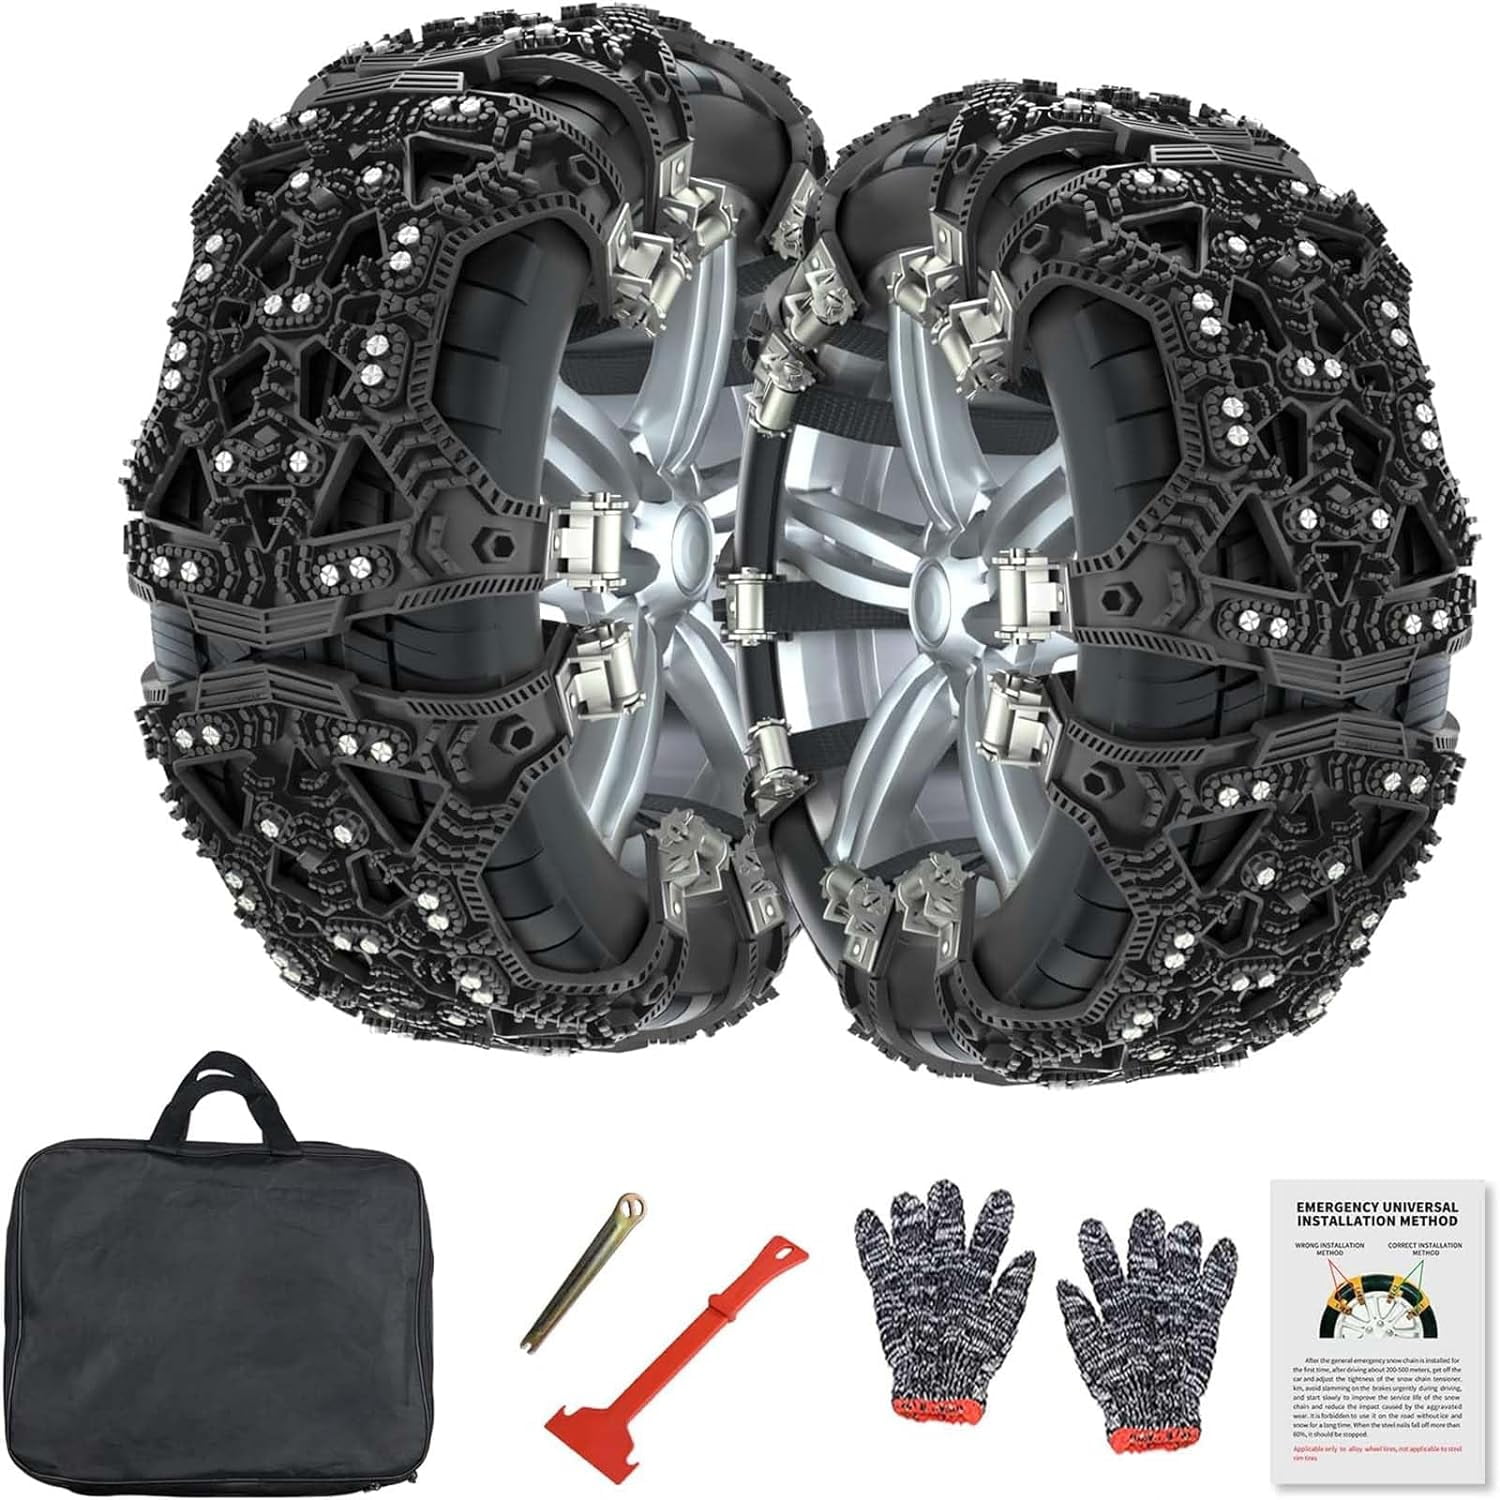 ABORON 12 Pcs Tire Snow Chains, Anti-Skid Chains for SUV,Truck,RV of Tire  Width 220-310 mm (8.6-12.2 inch),Heavy Duty,Thickened,Adjustable 